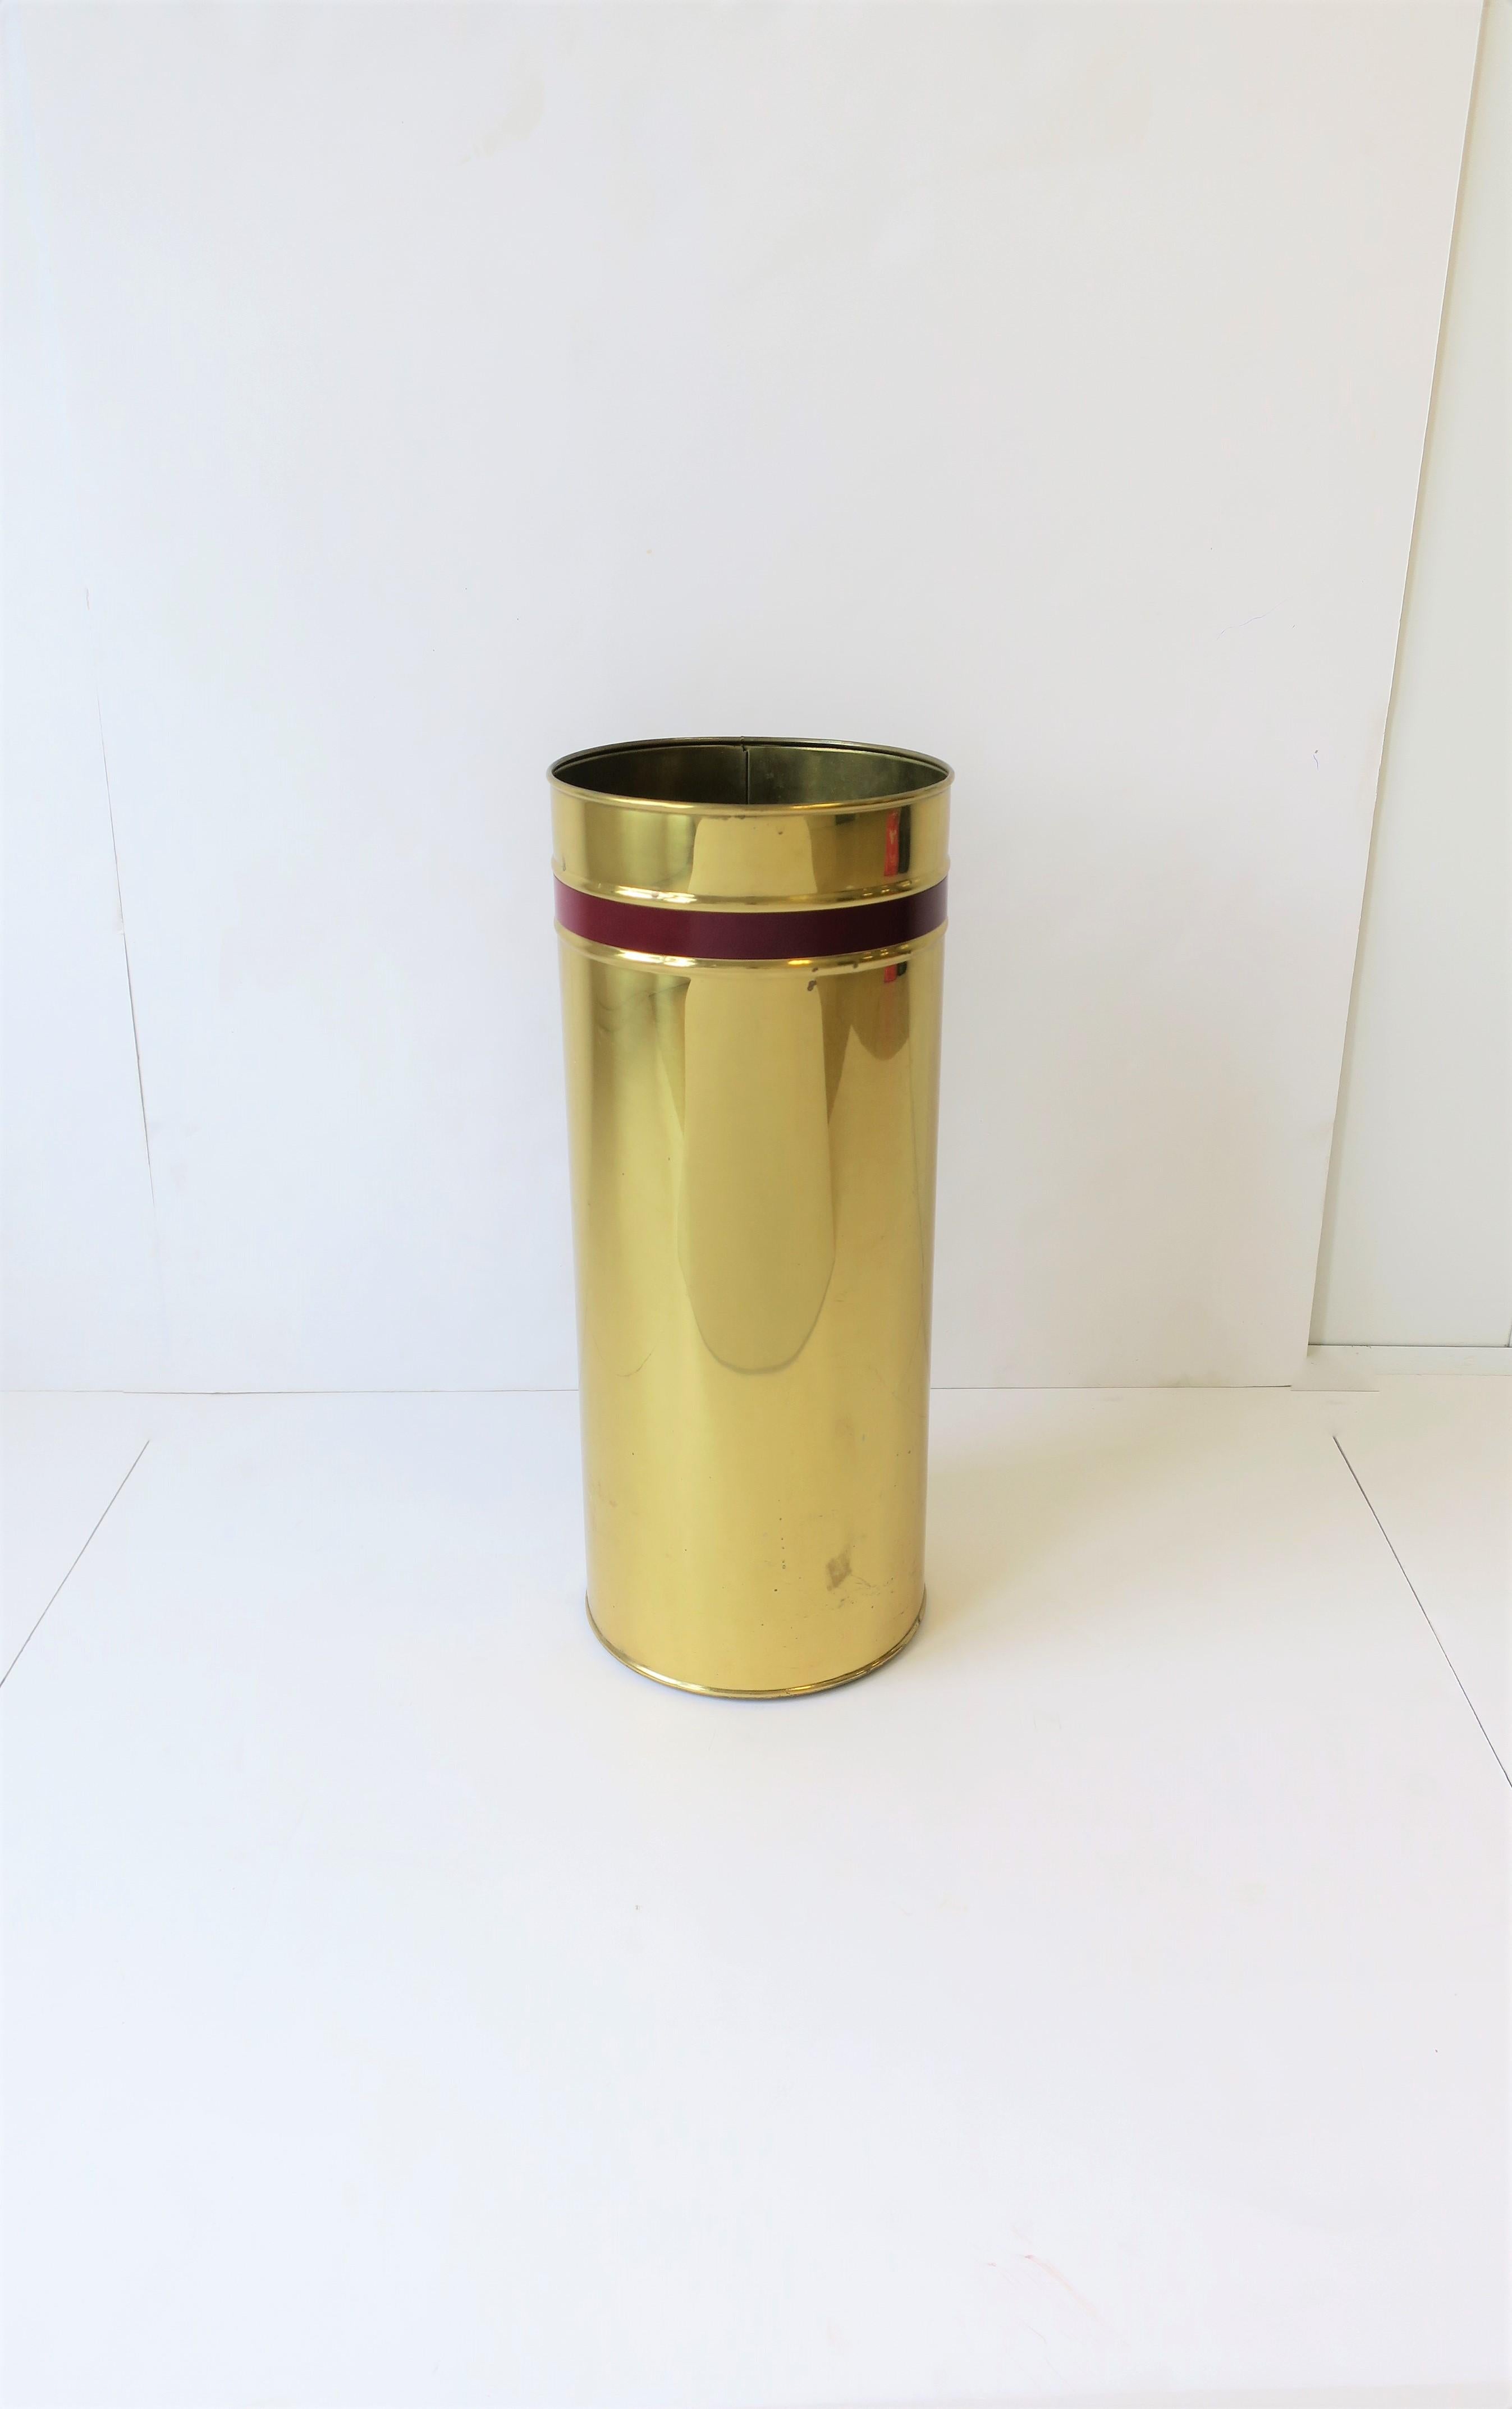 A vintage English brass umbrella stand with red burgundy decorative stripe or band, circa 20th Century, 1960s-1970s, England. Marked 'Made in England' on bottom as show in image #11 and 12. 

Measurements include: 16.25